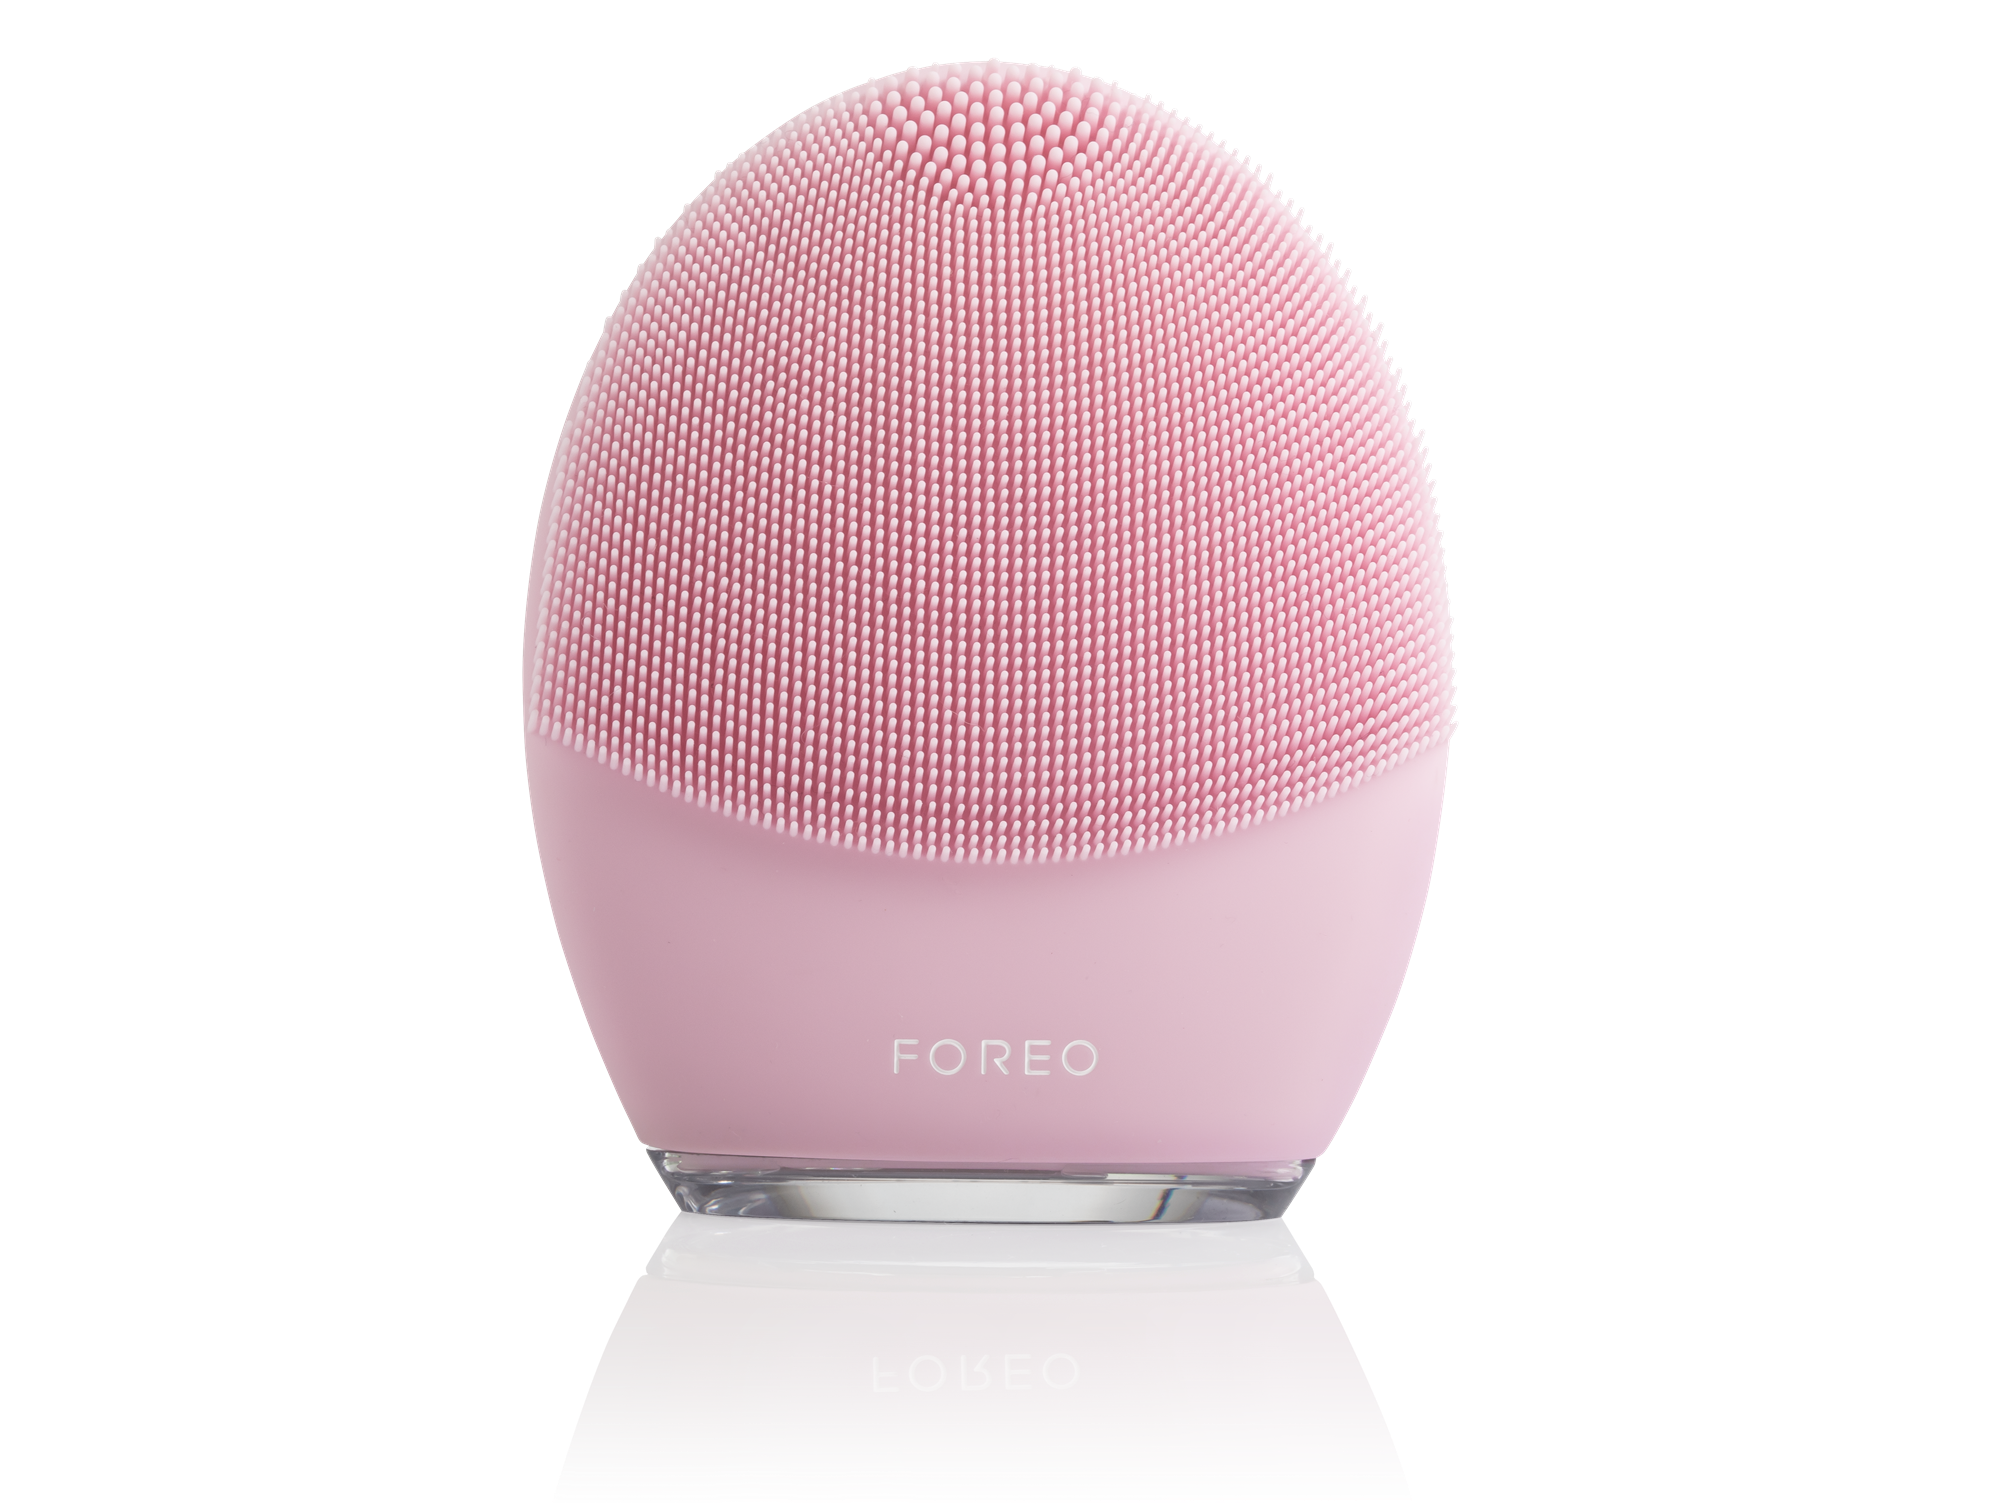 05 FOREO LUNA 3 Front Pearl pink Transparent. LUNA 3 PEARL PINK PARA PIELES NORMALES DE FOREO